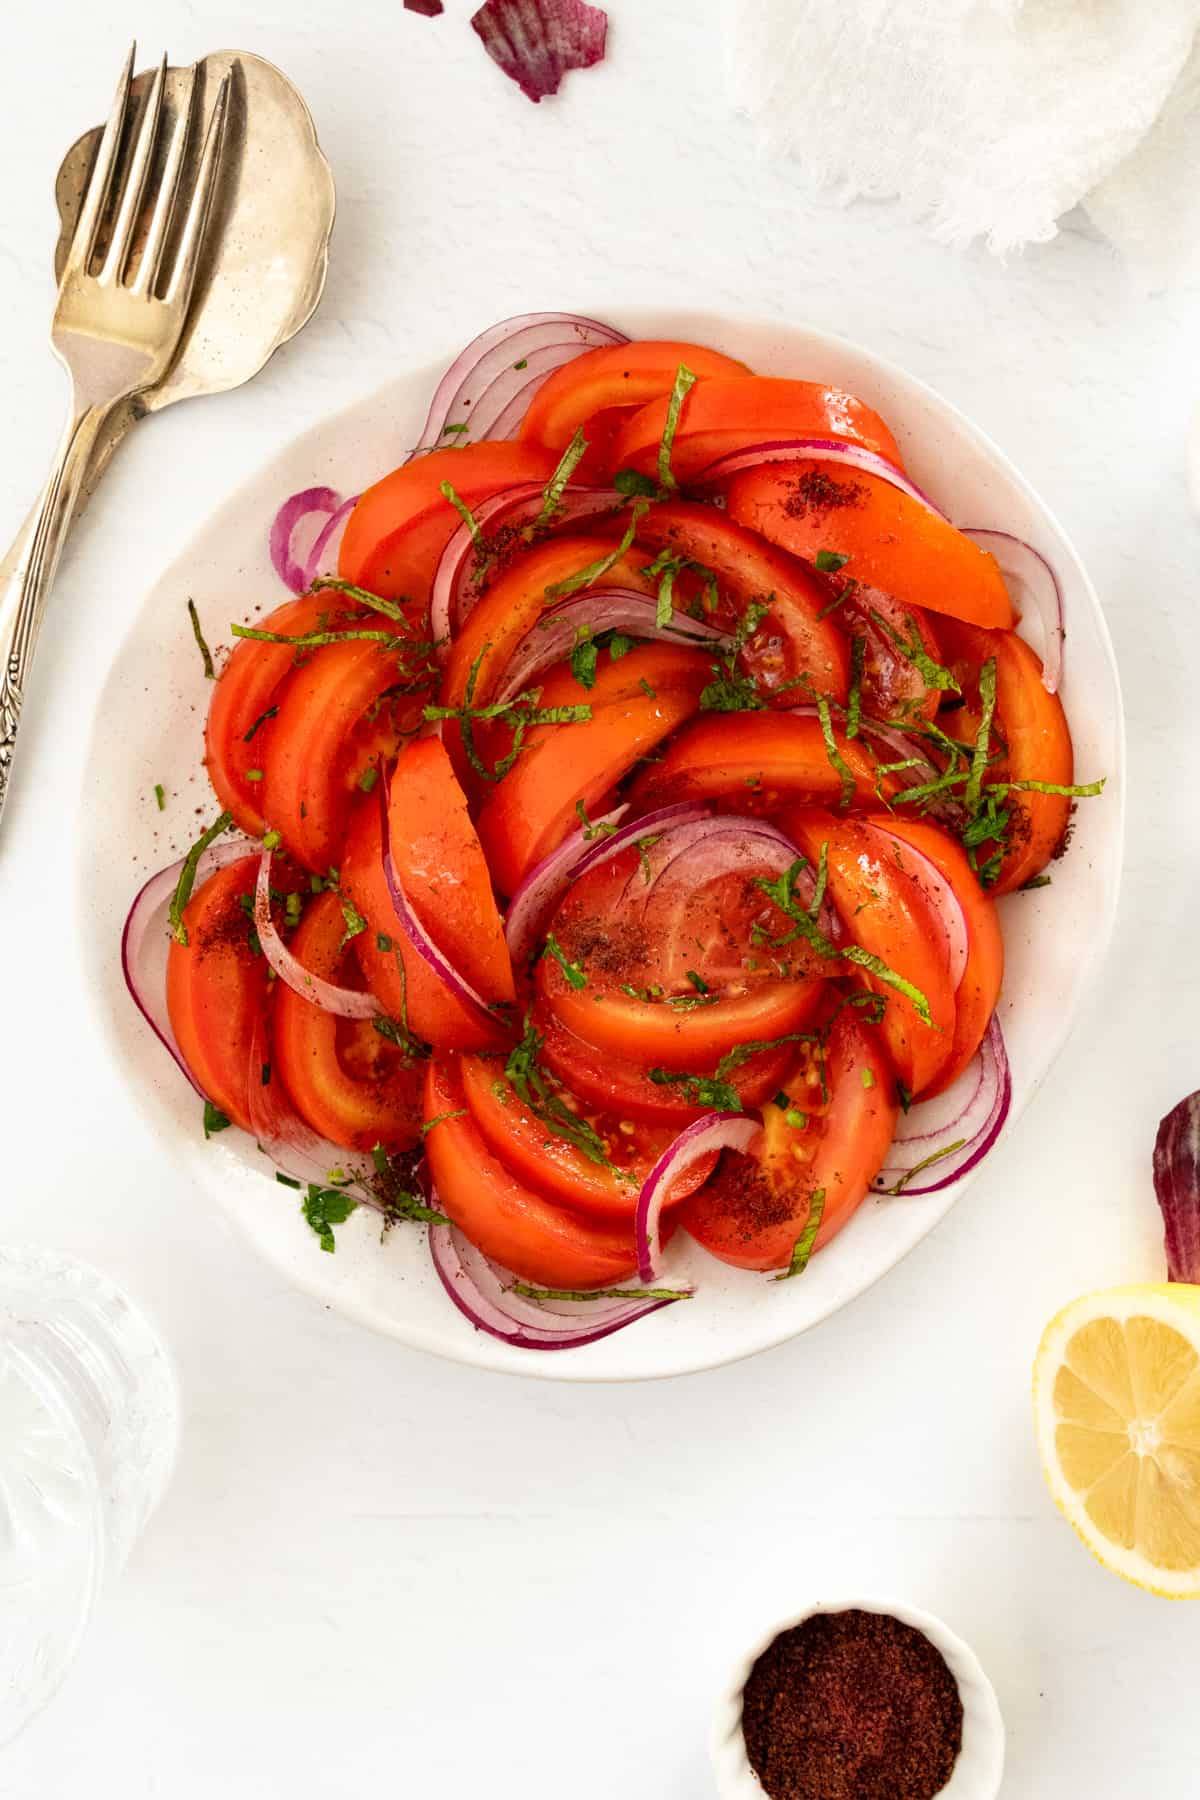 salad serving-ware next to a plate of tomato salad